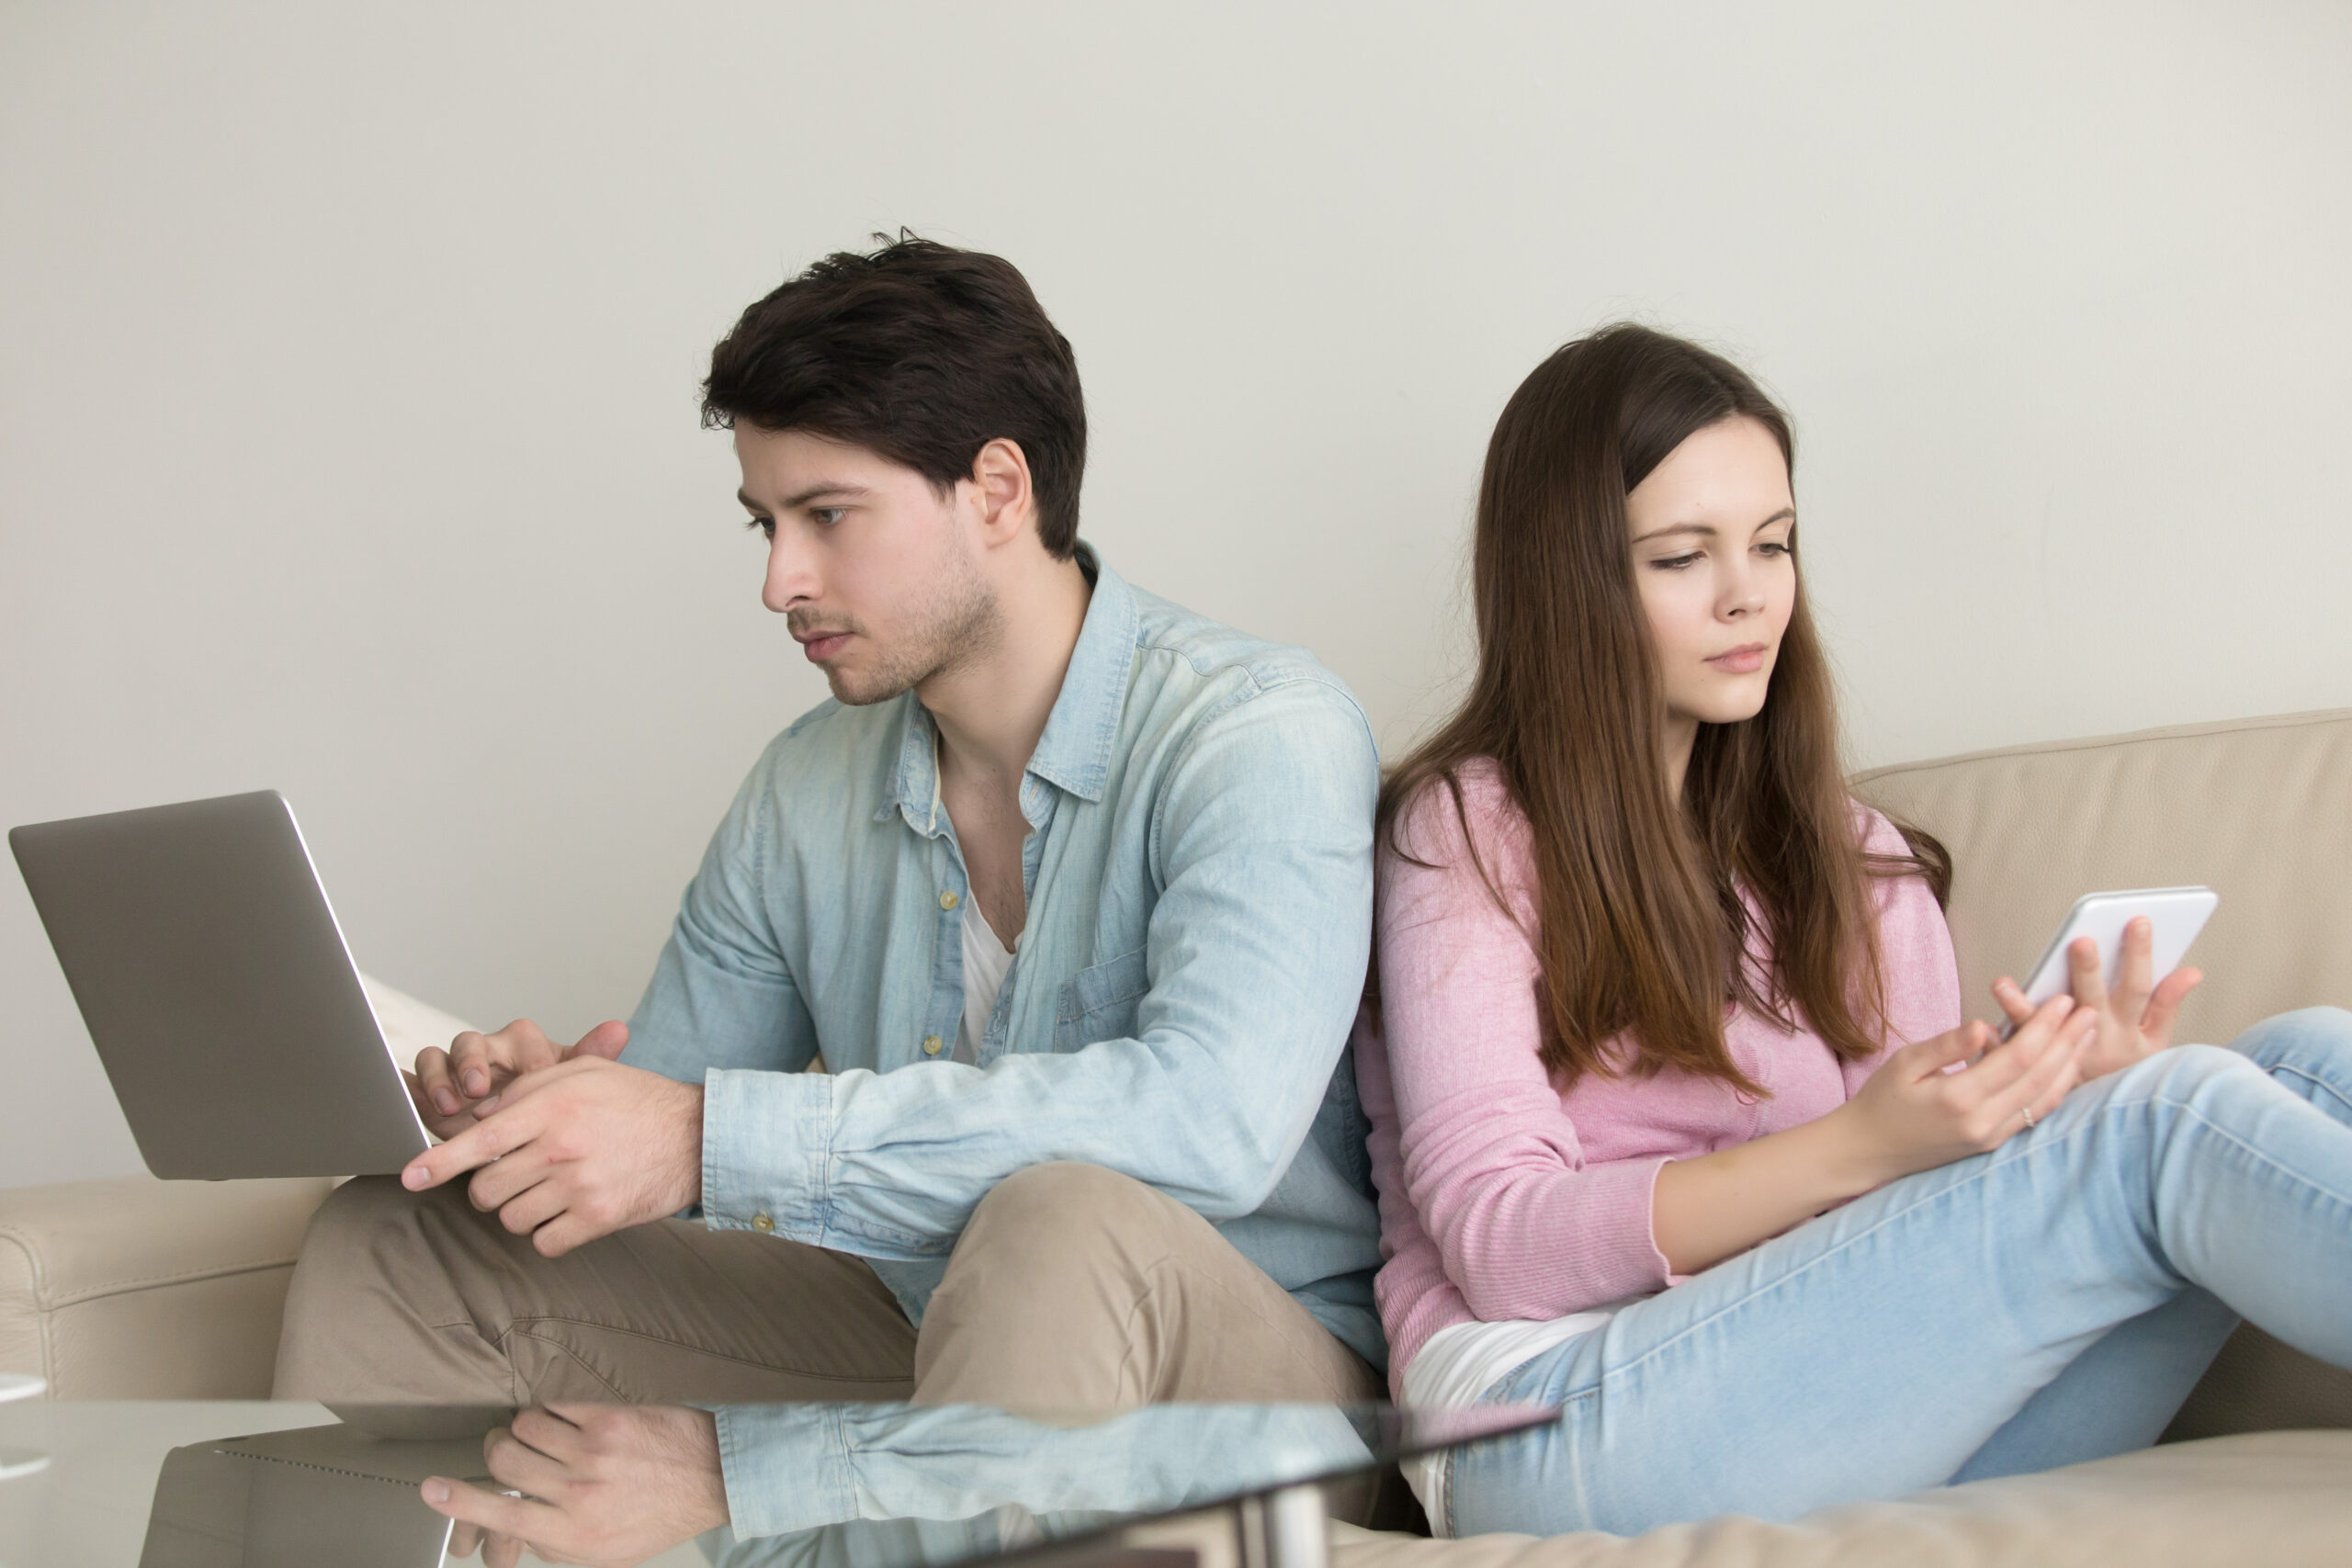 Ex-partner Living Together is Becoming Increasingly Common